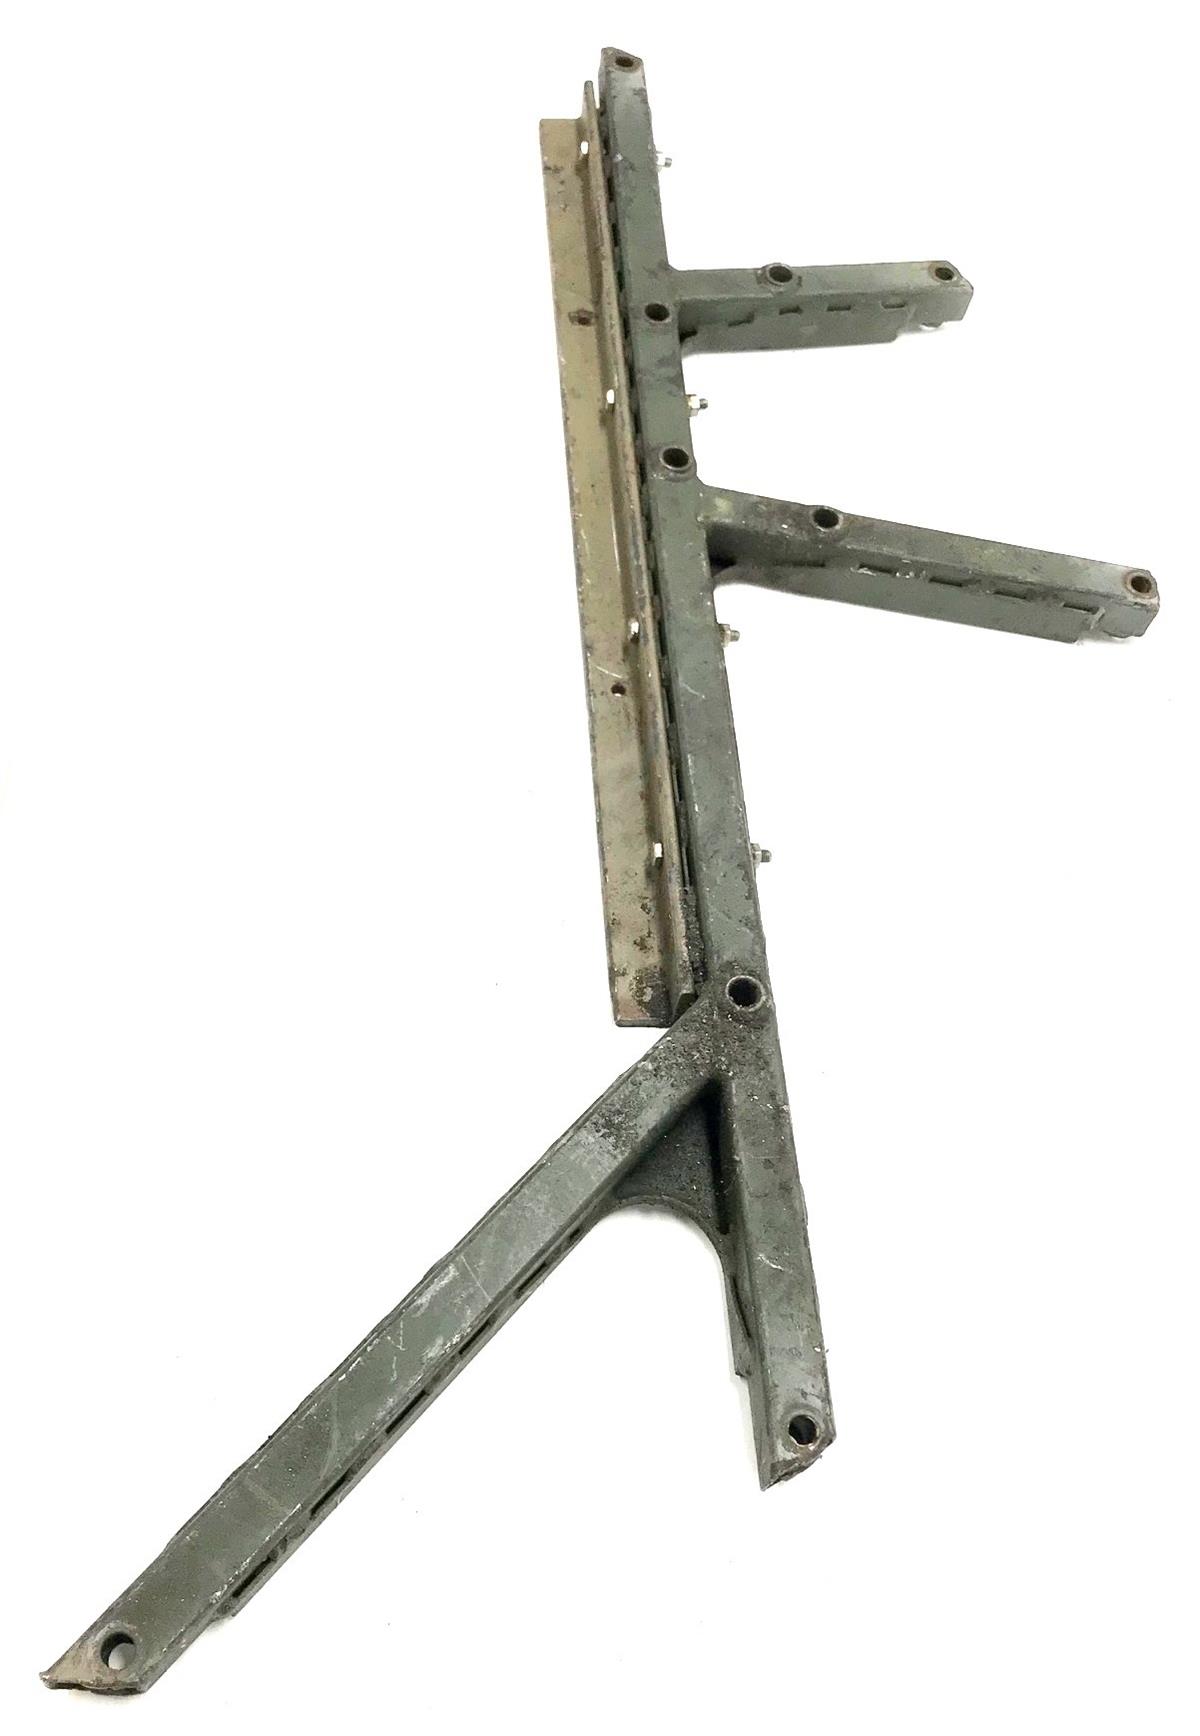 HM-1067 | HM-1067  Weapon Station Tray Tube With Mounting Bracket HMMWV  (7).jpg